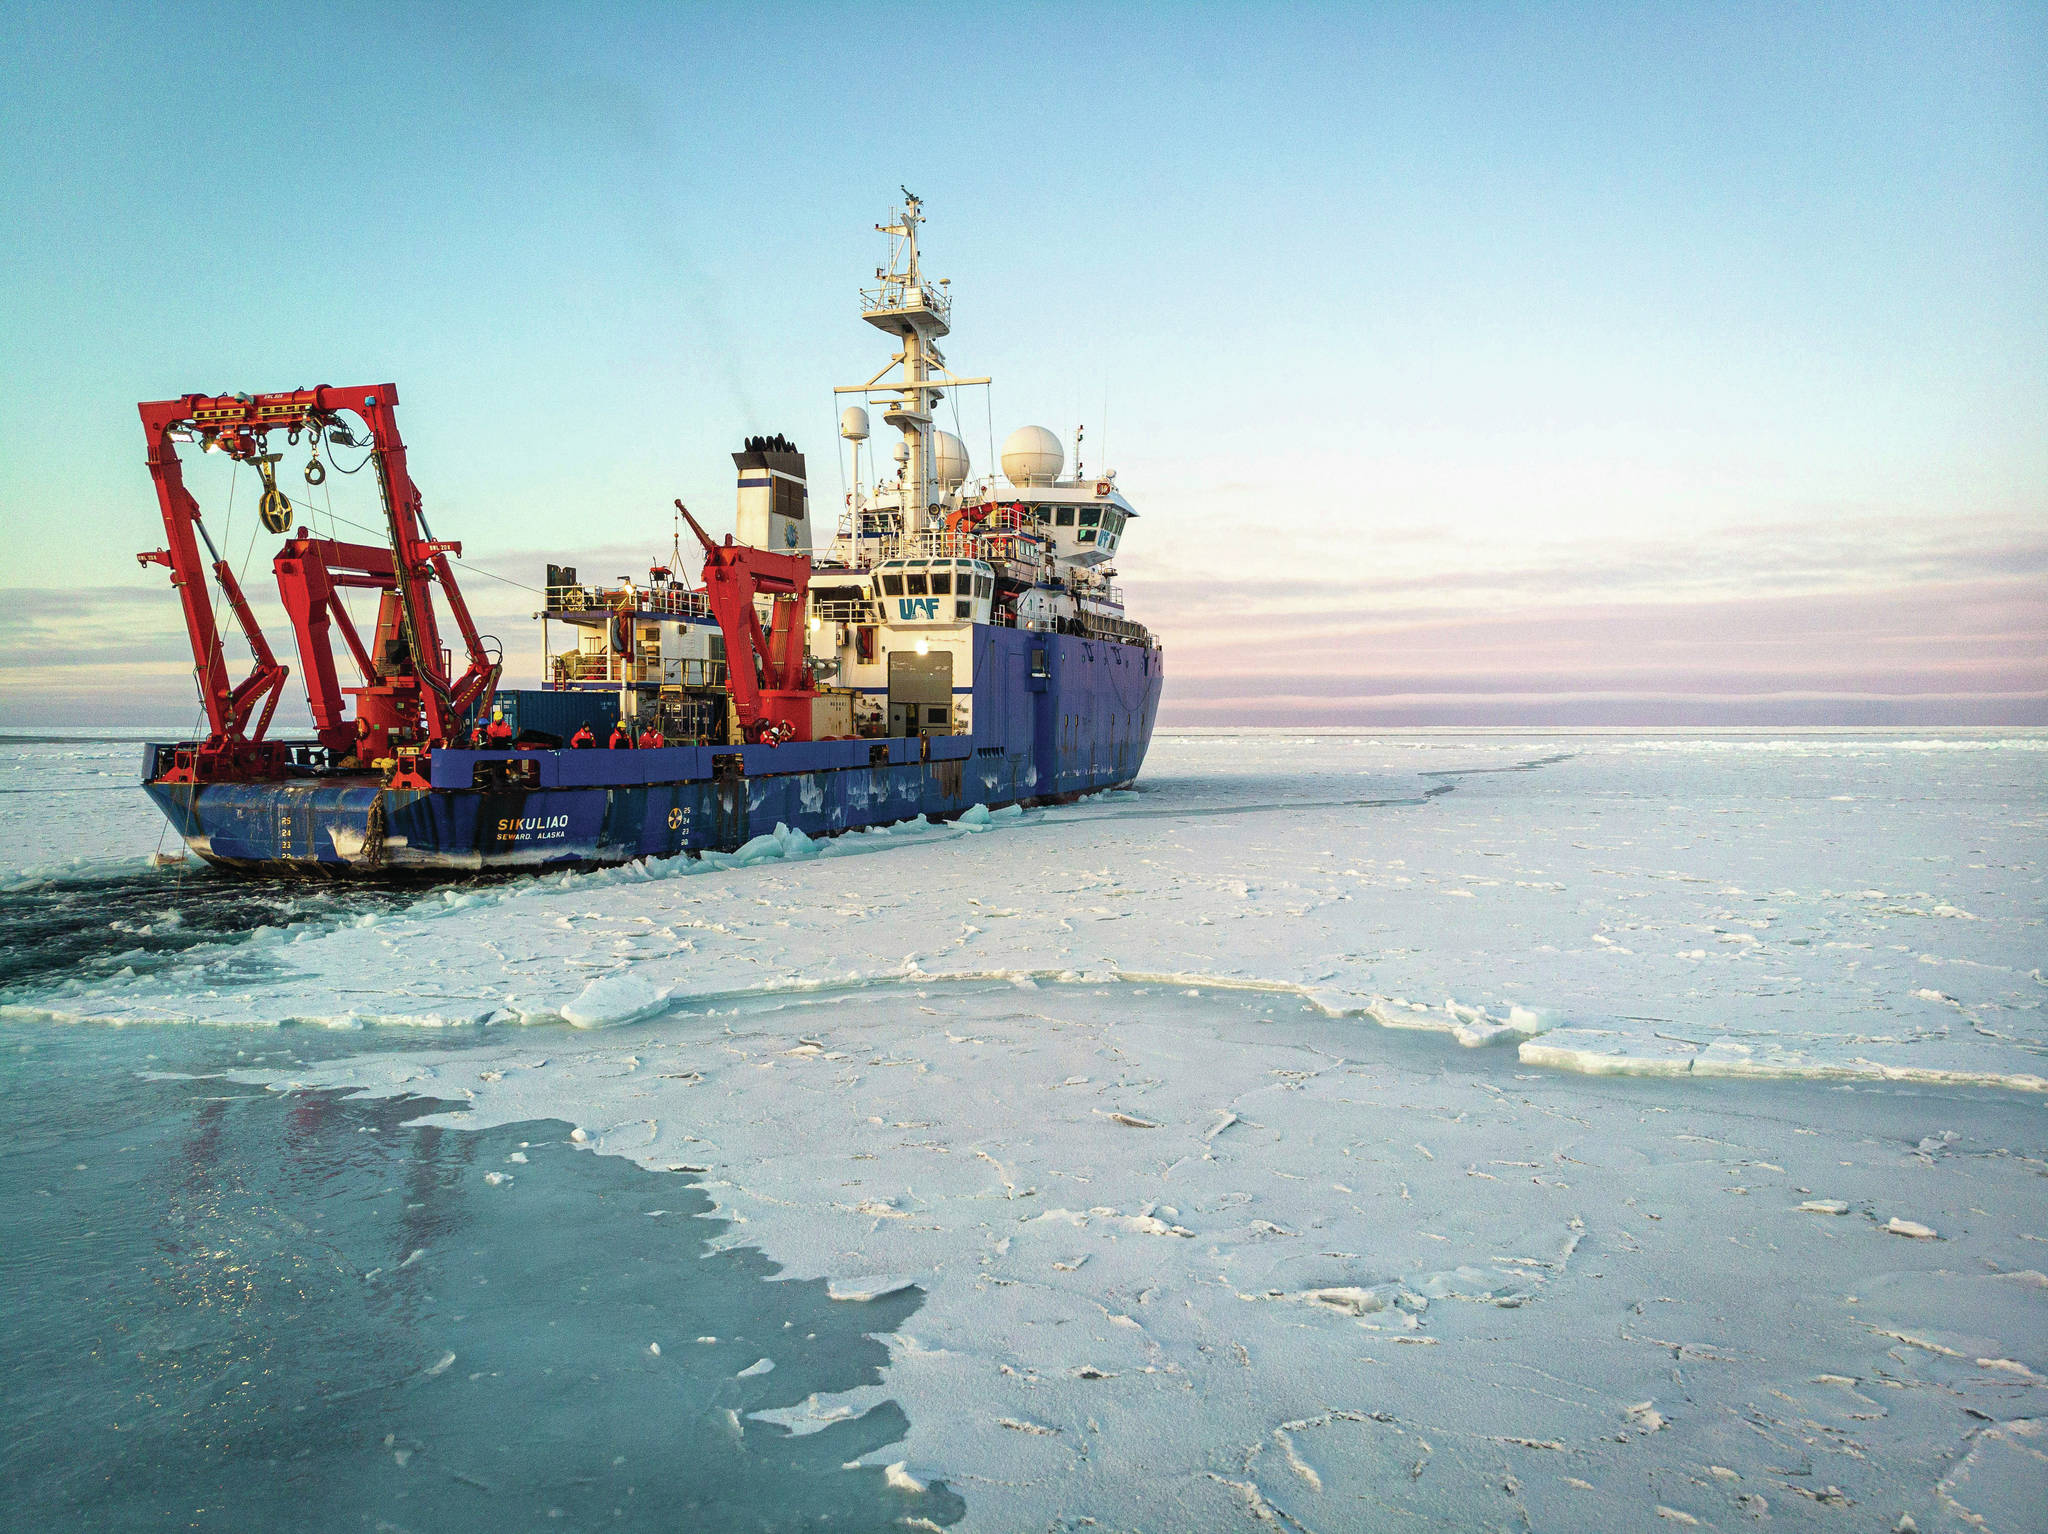 John Guillote                                 The research vessel Sikuliaq makes its way through thin sea ice in the Beaufort Sea off Alaska’s north coast on Nov. 14.